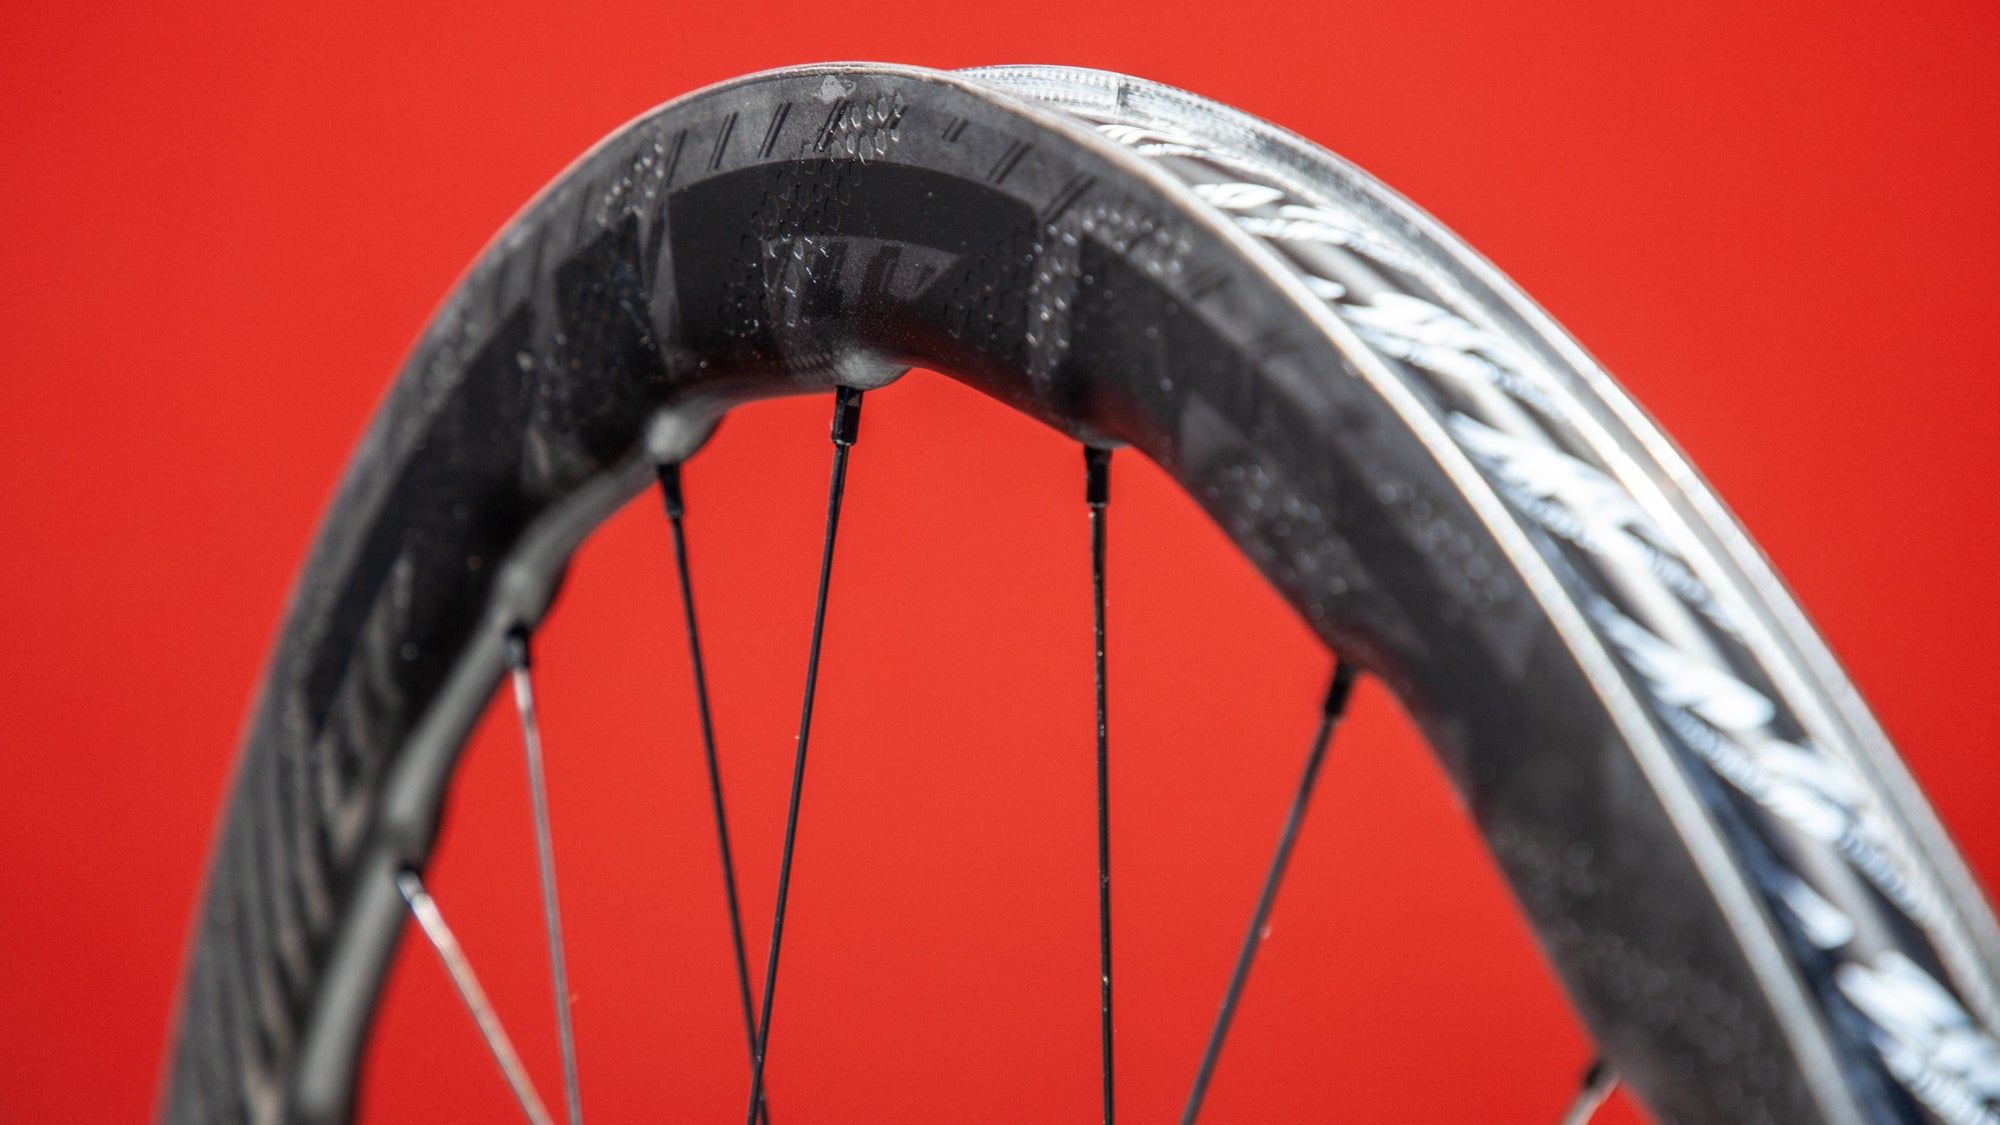 Sawtooth for Speed: A First Look at the new Zipp 353 NSW Wheels